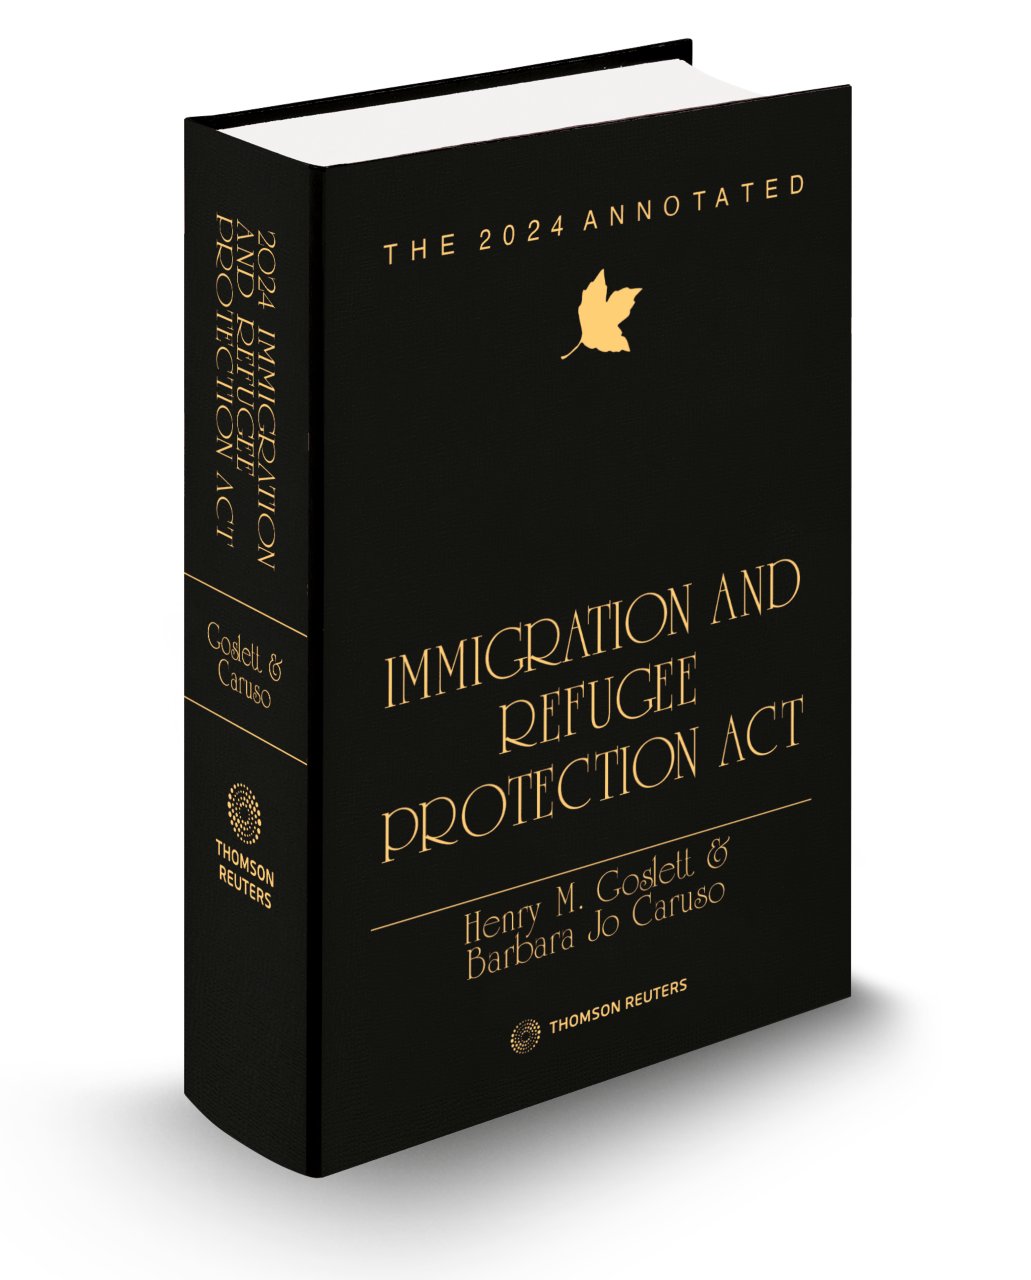 Front cover image for The 2024 Annotated Immigration and Refugee Protection Act of Canada.